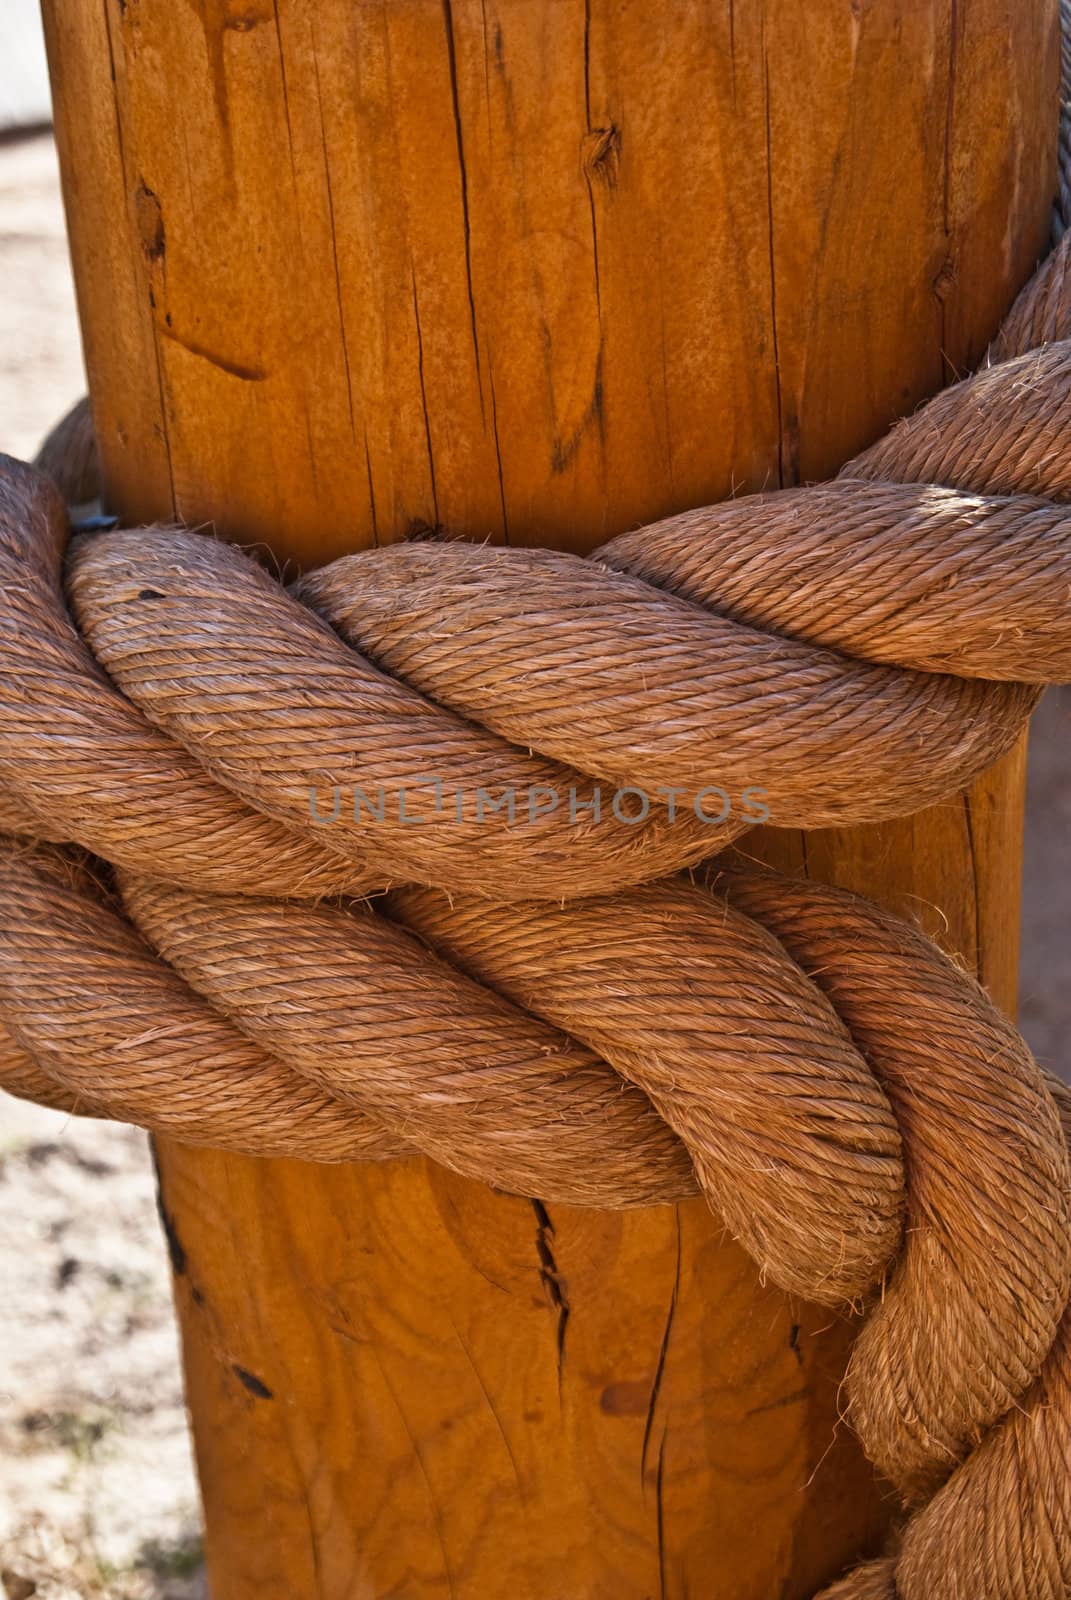 Rope on a Post 3 by emattil